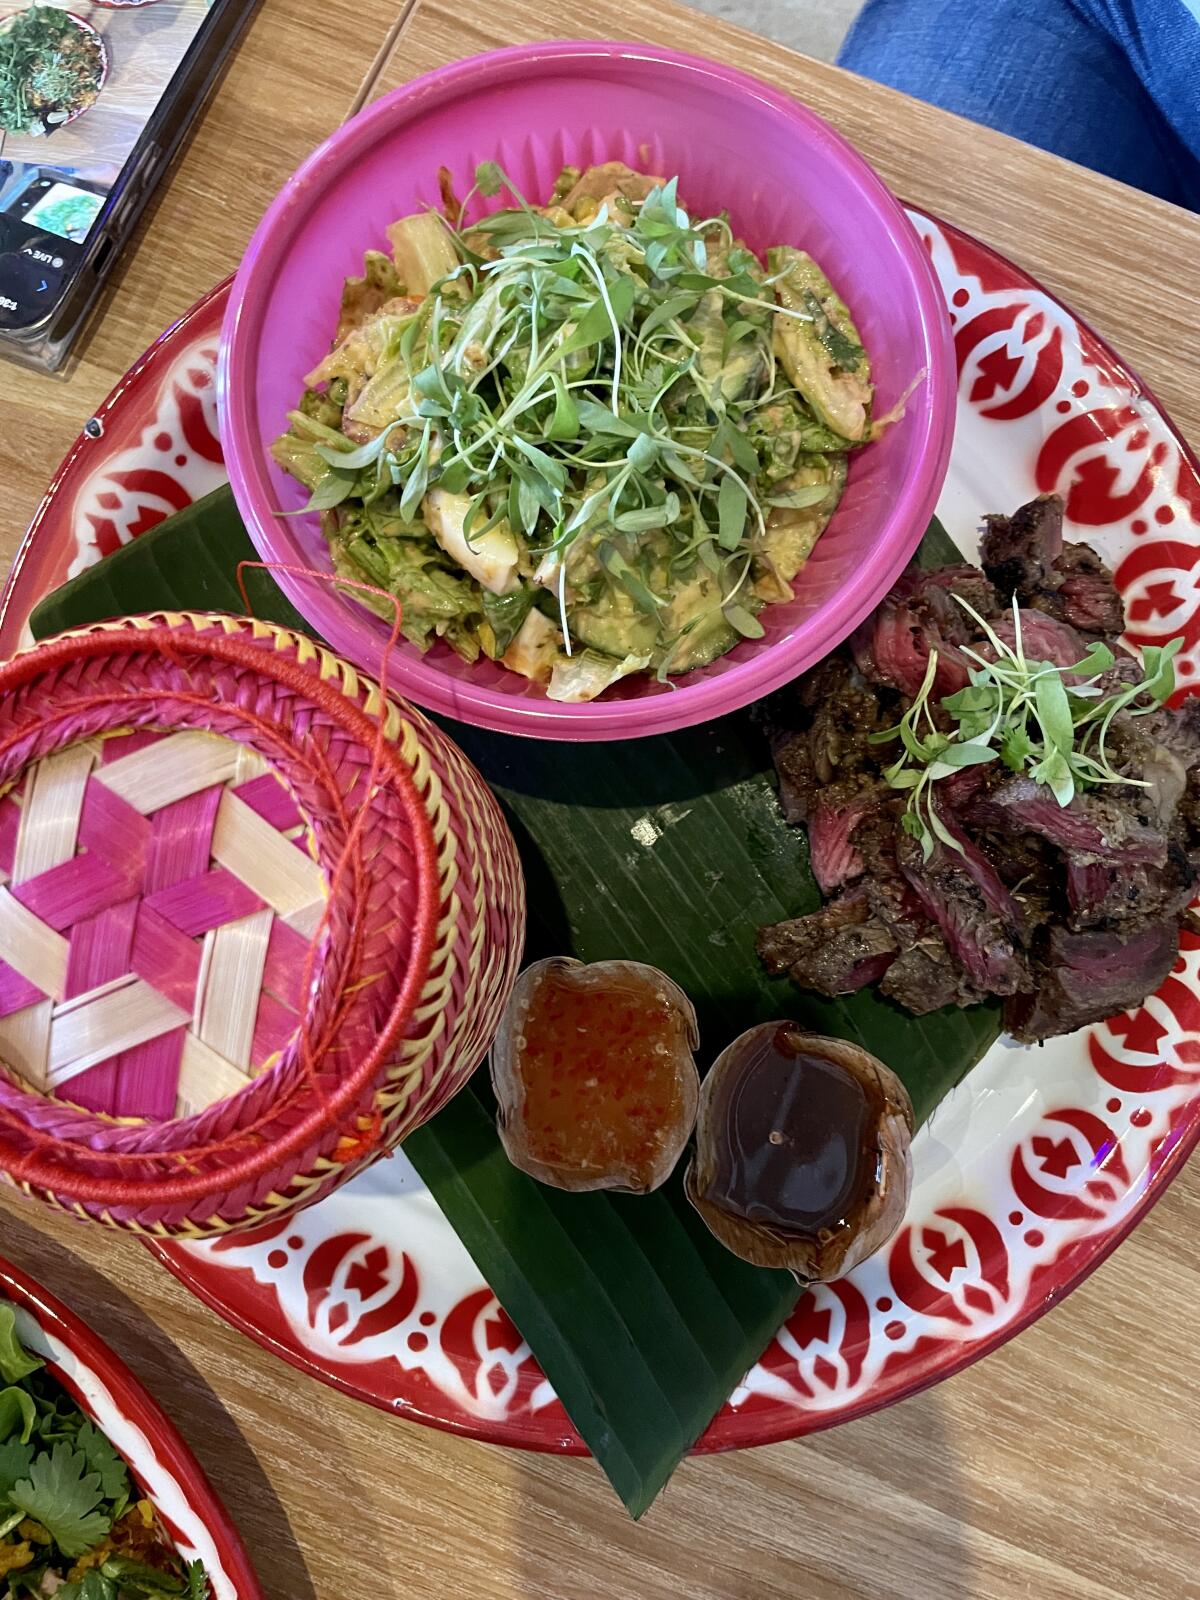 Pieng Xeen Lao grilled meat dish from Yum Sະlut in downtown Los Angeles